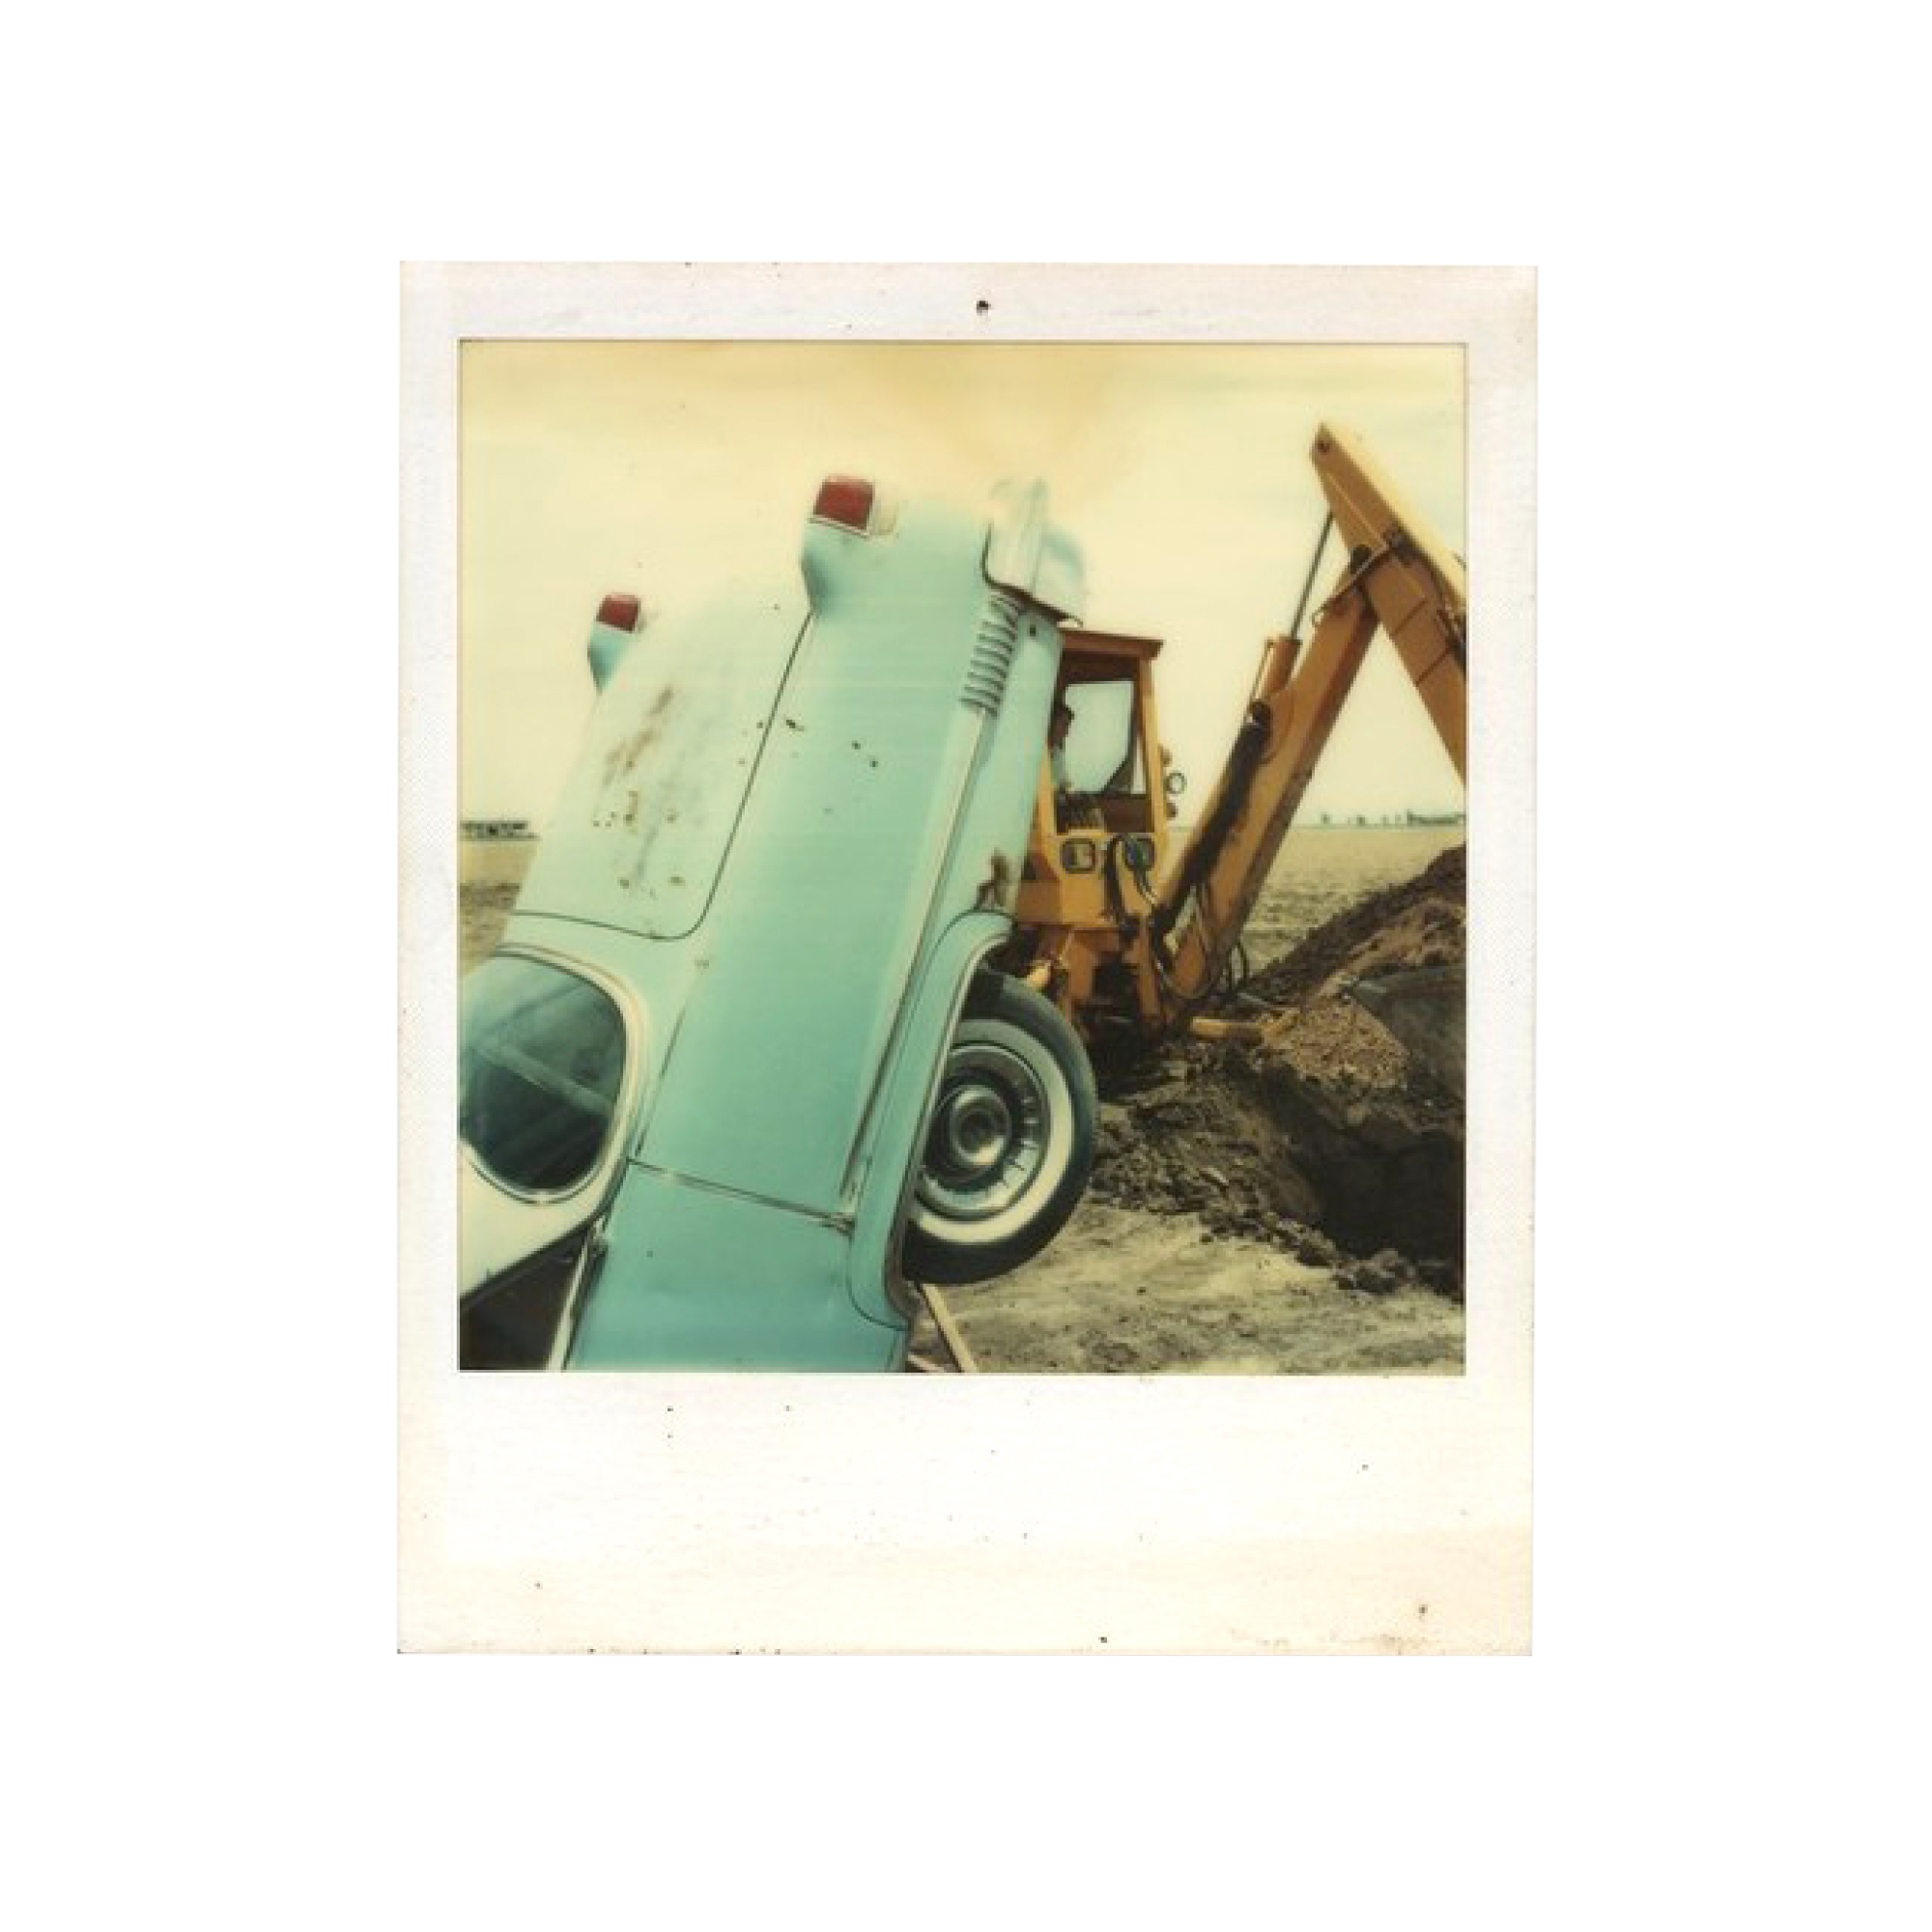 Cadillac Ranch Polaroids by Chip Lord of Ant Farm, 1974